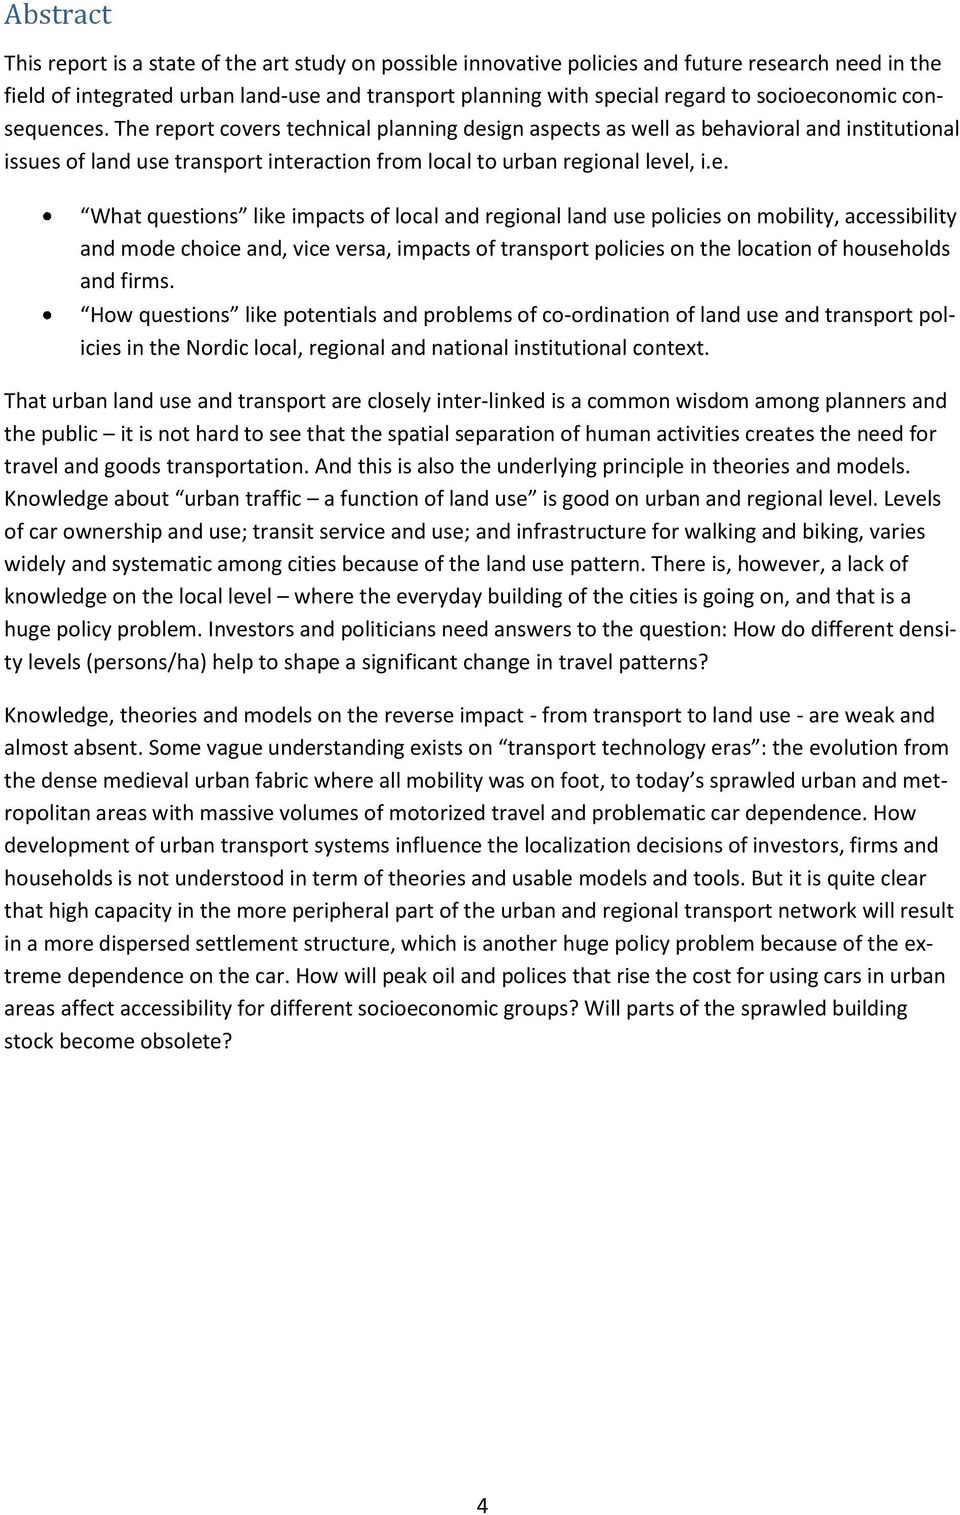 e. What questions like impacts of local and regional land use policies on mobility, accessibility and mode choice and, vice versa, impacts of transport policies on the location of households and